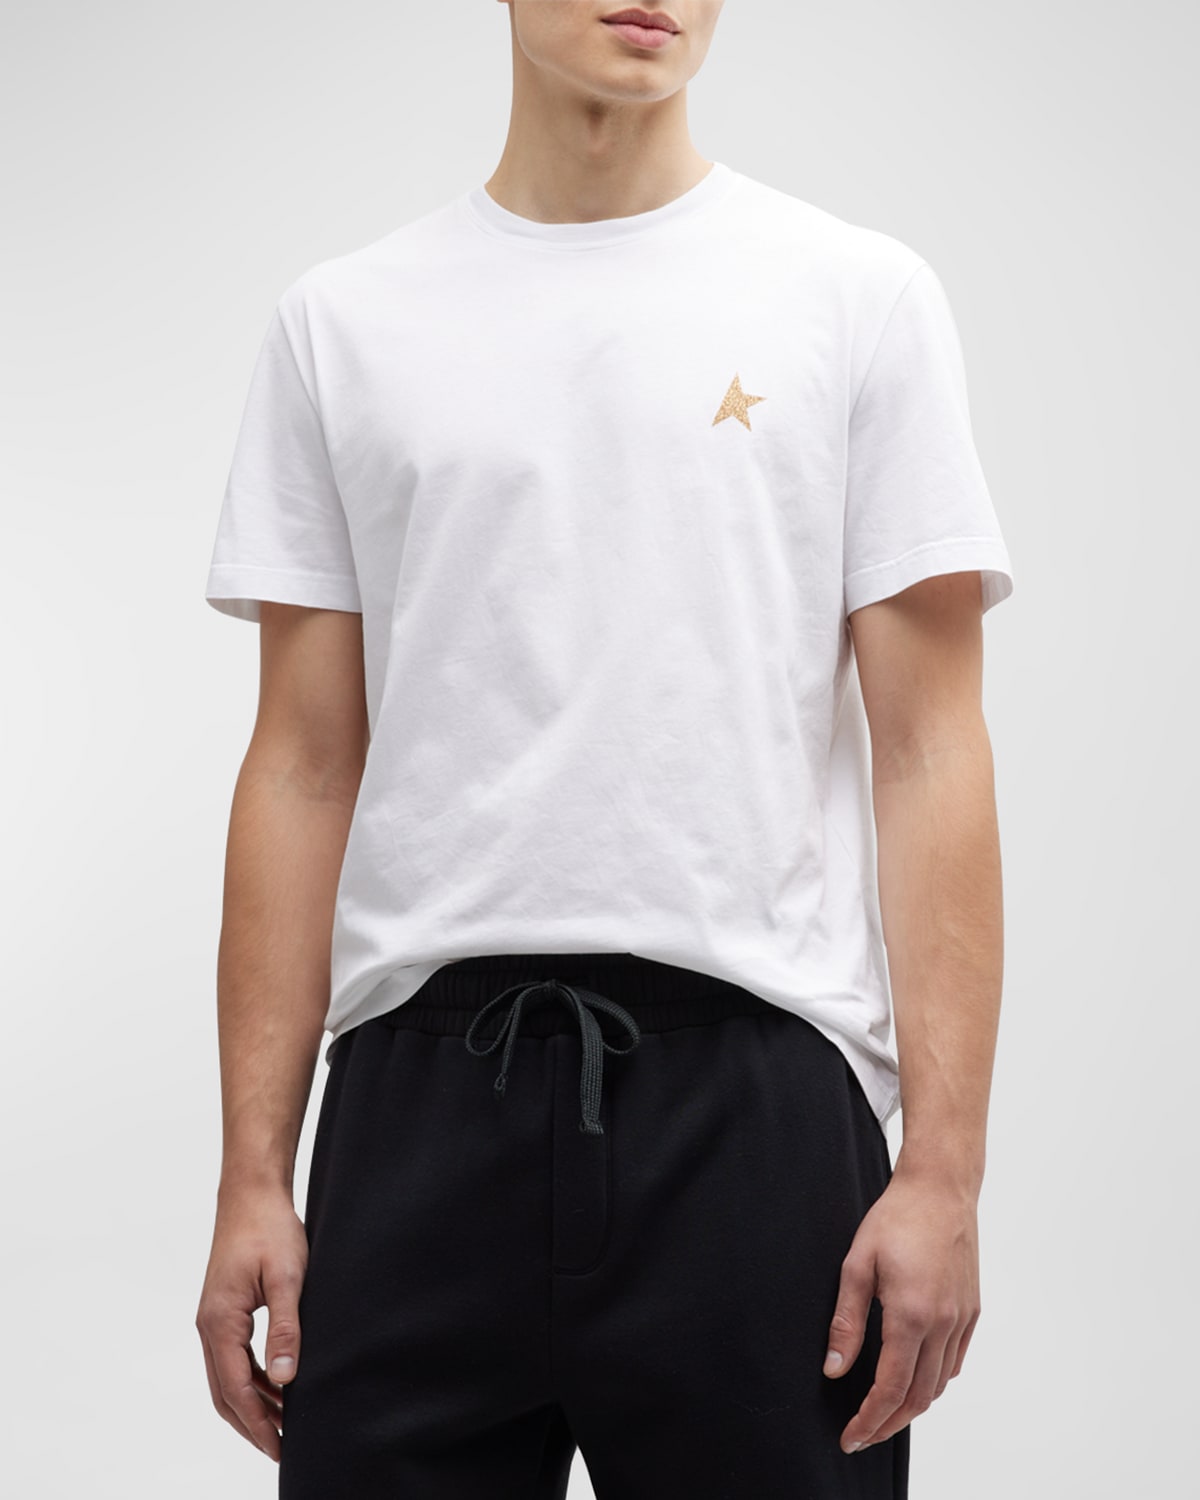 Men's T-Shirt with Small Glitter Star